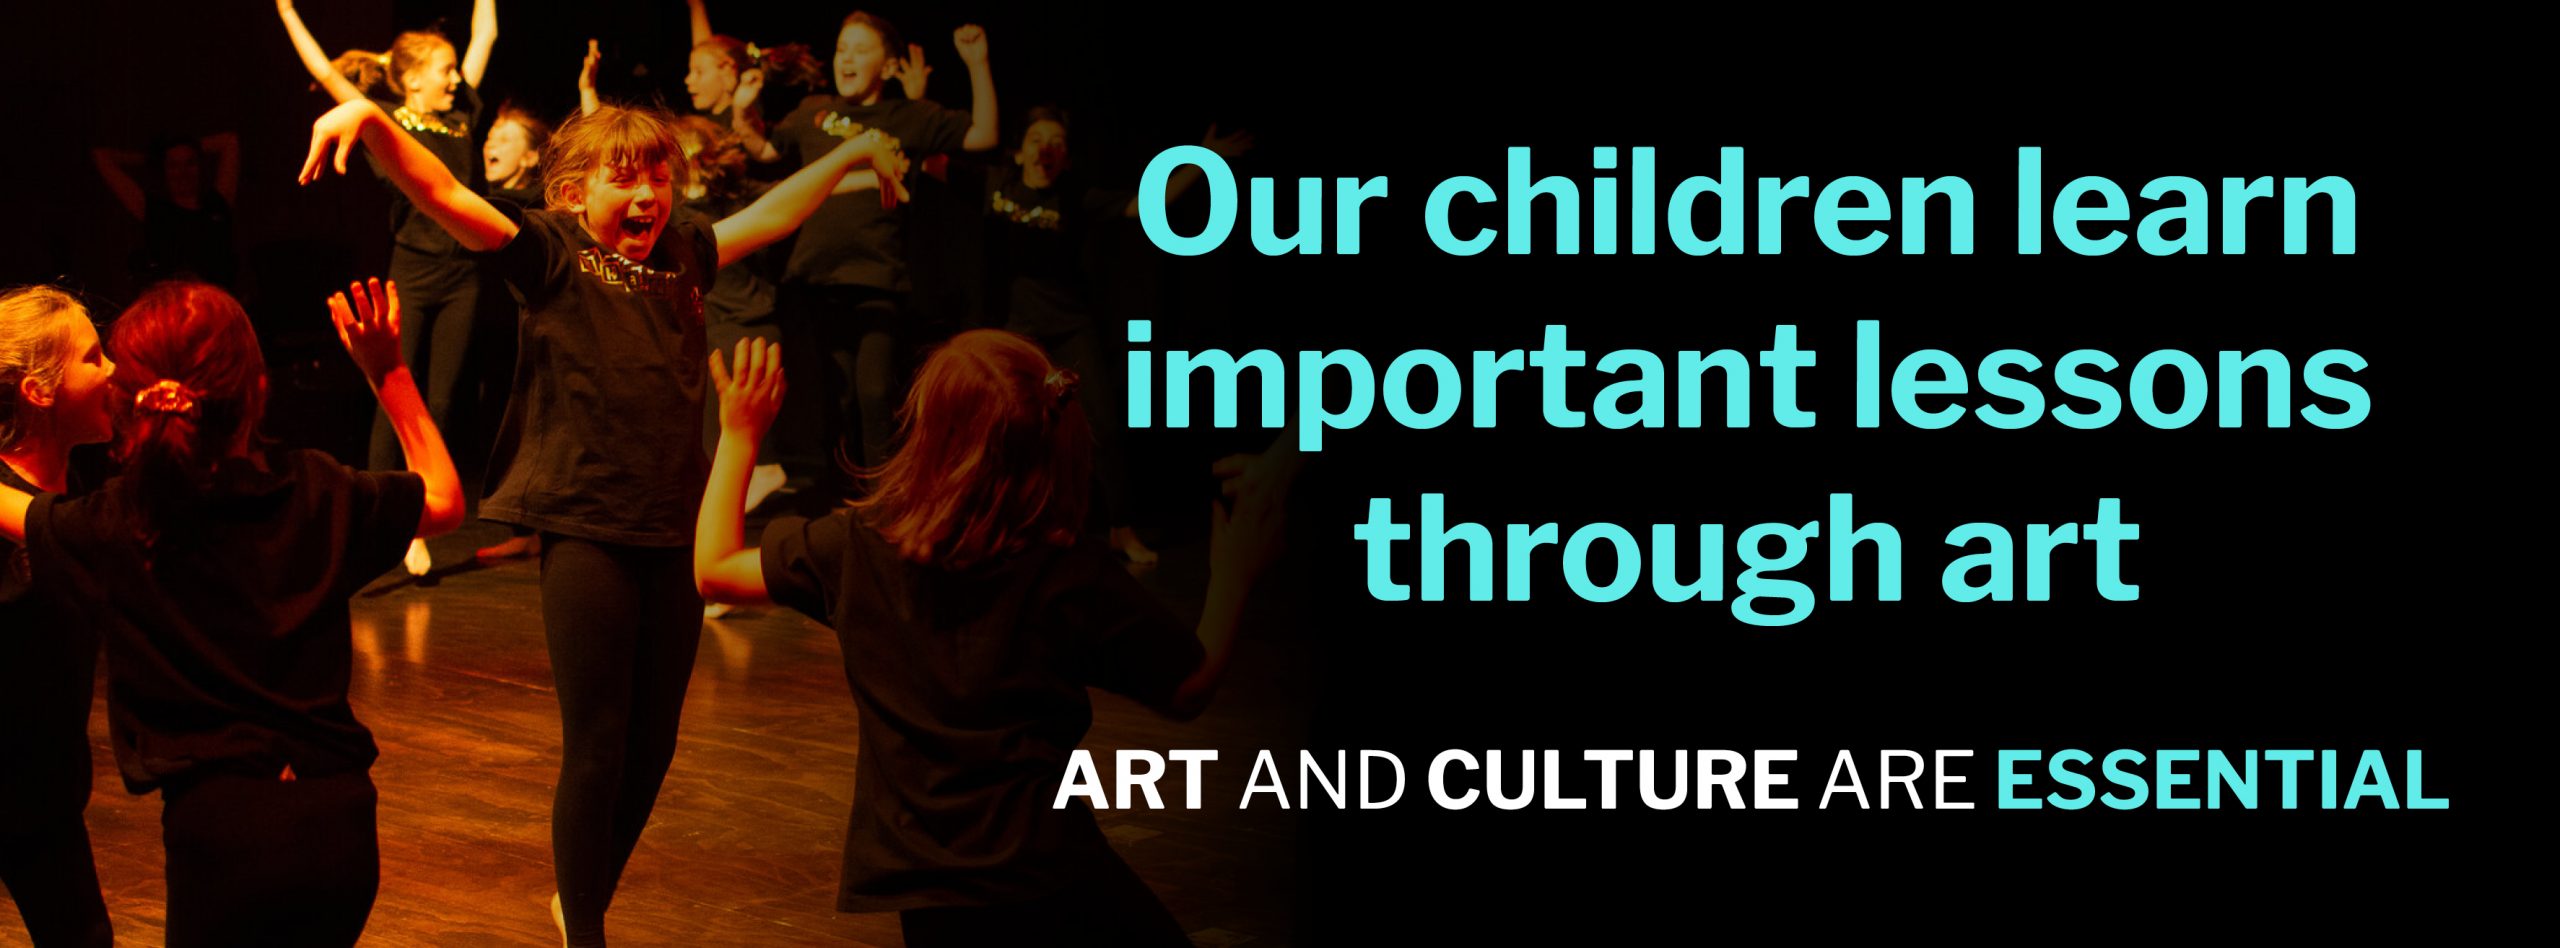 A child is jumping and laughing with her arms outstretched, surrounded by other children jumping and laughing. They are in matching black costumes, and covered in a warm light. Overlaid are the words: “Our children learn important lessons through art. Art and culture are essential.”